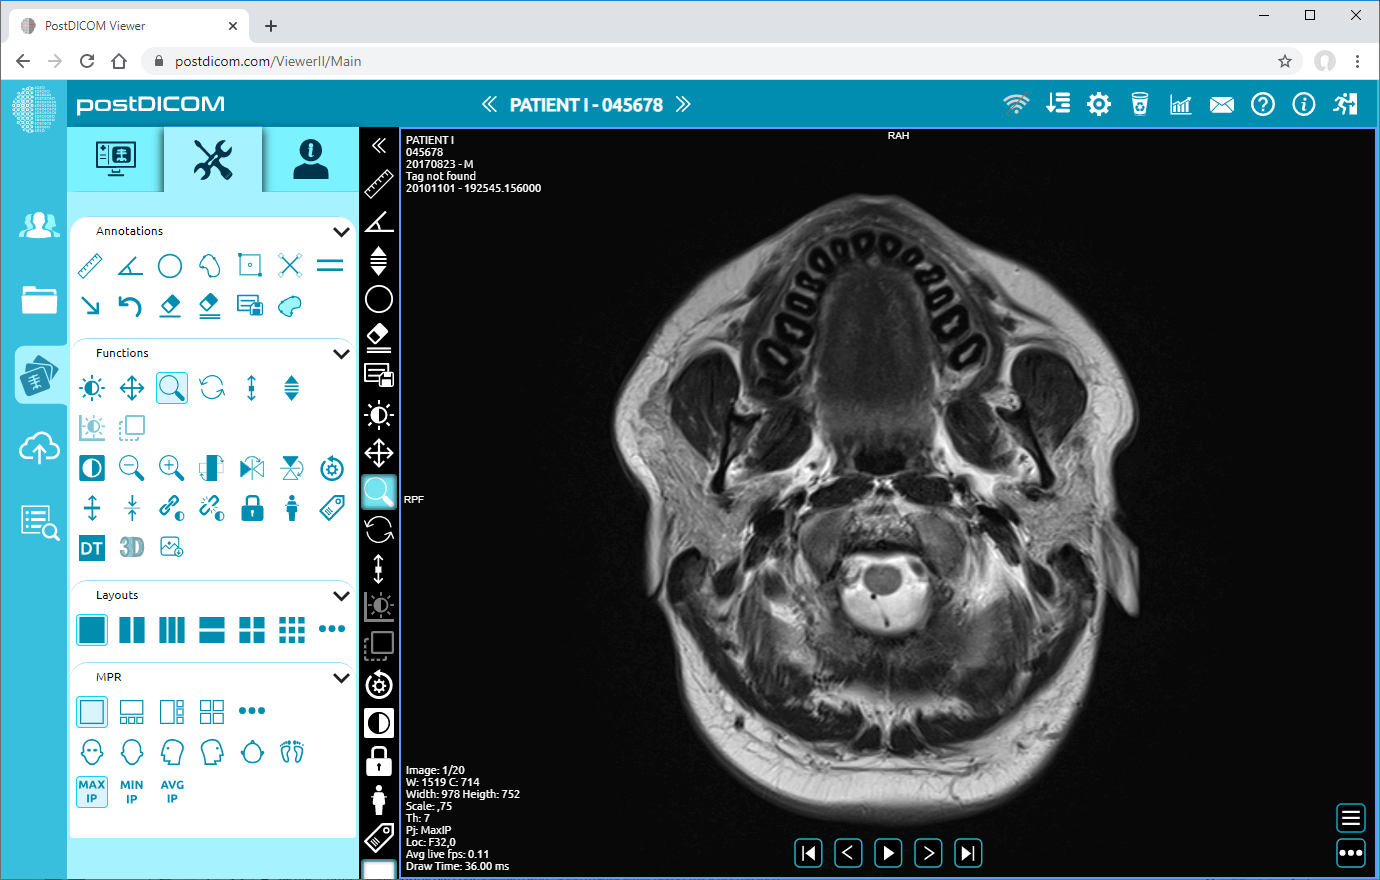 showing and hiding patient information on viewport